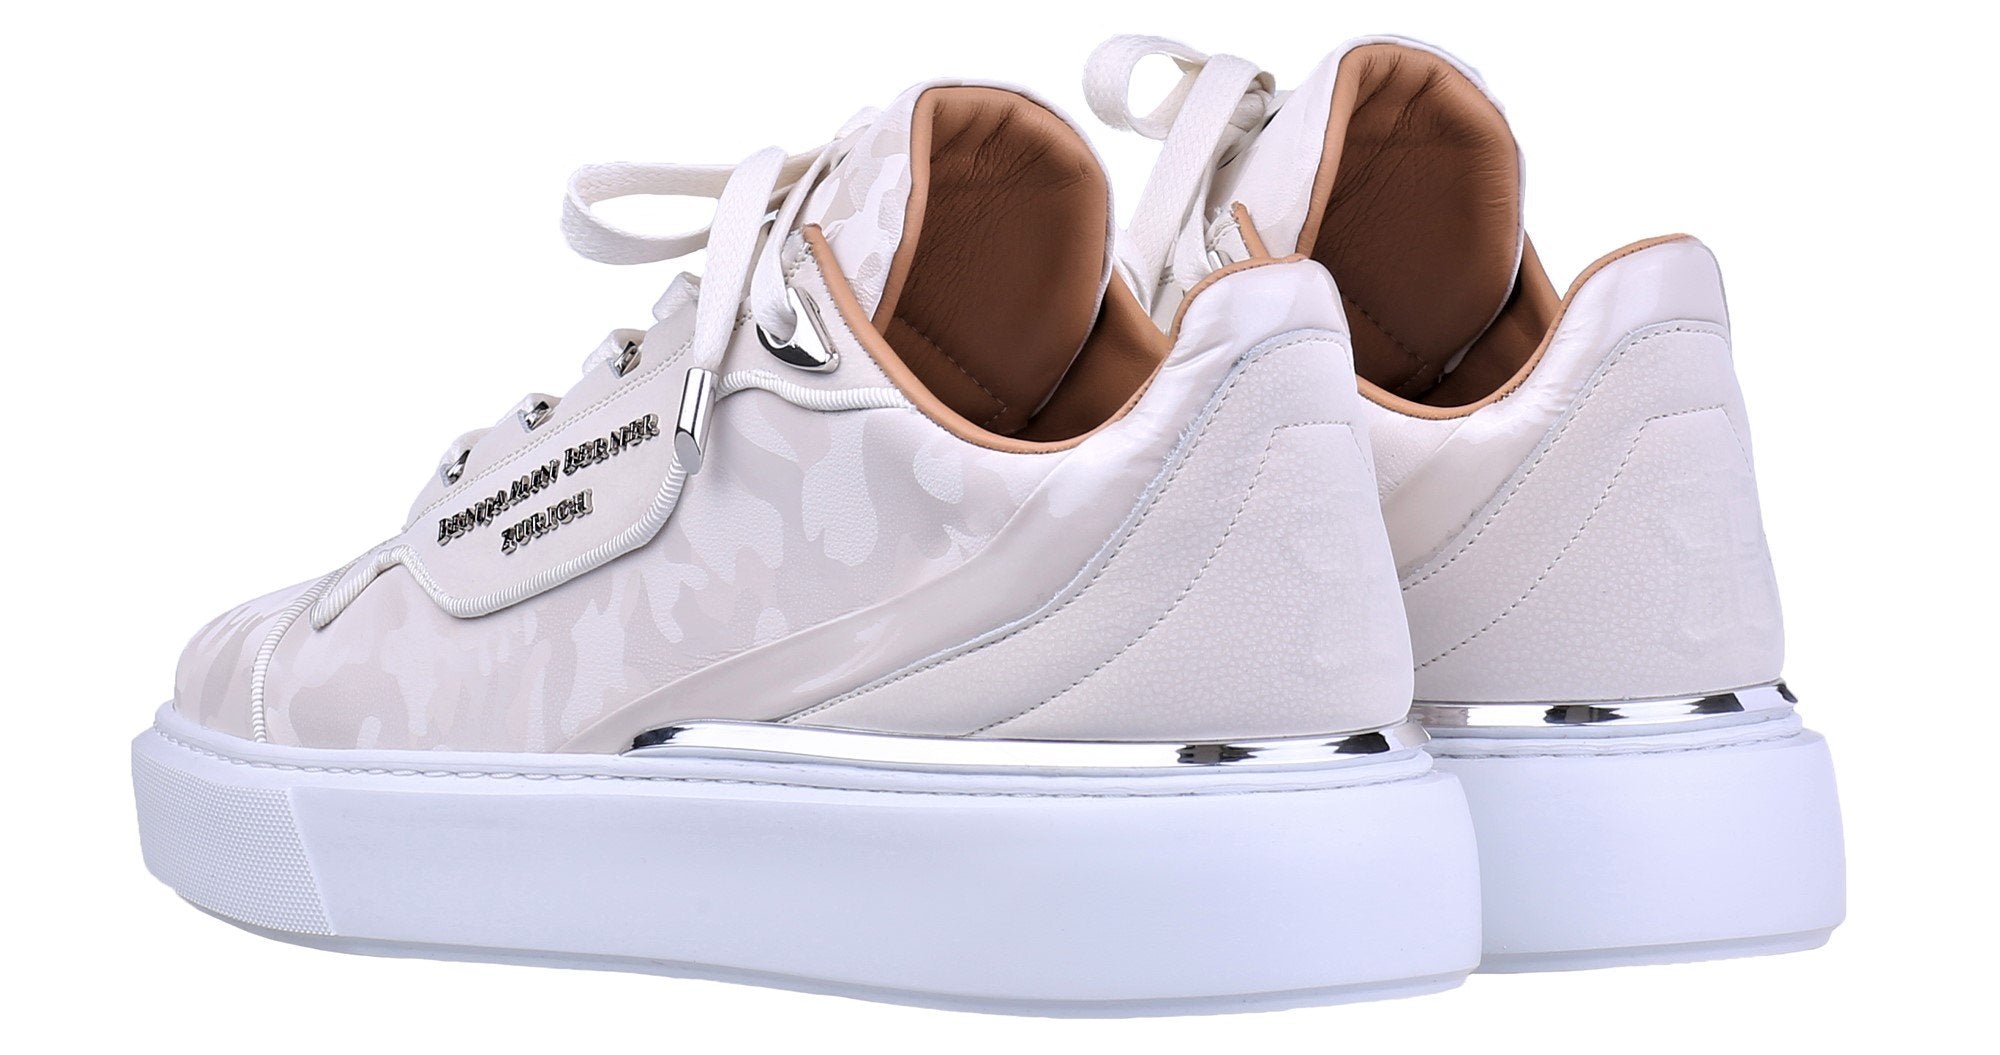 WOMEN'S LOW-TOP BNJ RAPHAEL MARBLE REFLECTIVE CAMOUFLAGE